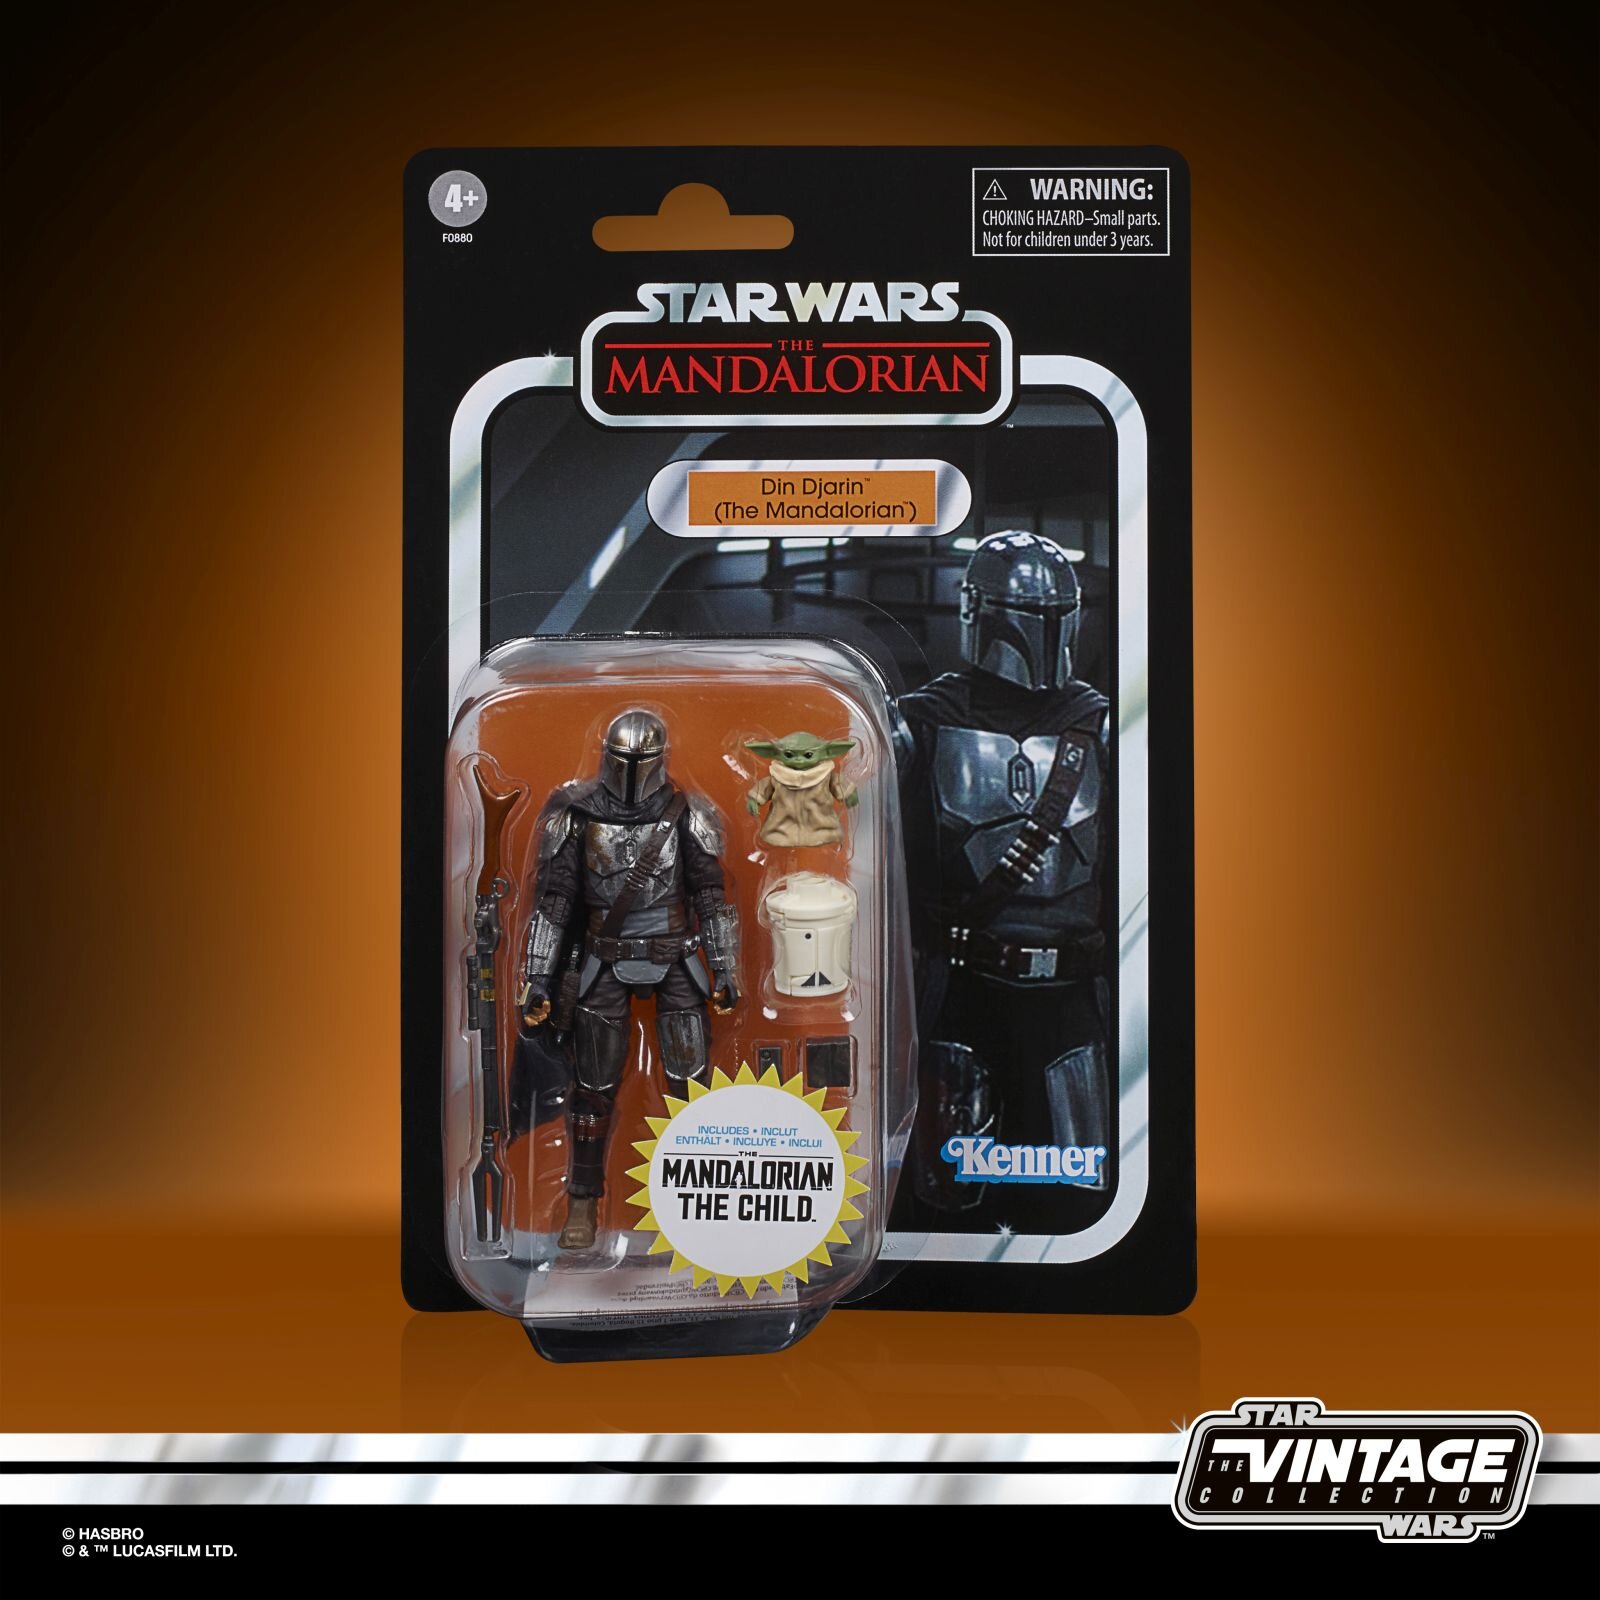 Star Wars Vintage Collection Din Djarin With Exclusive "The Child" Pin 